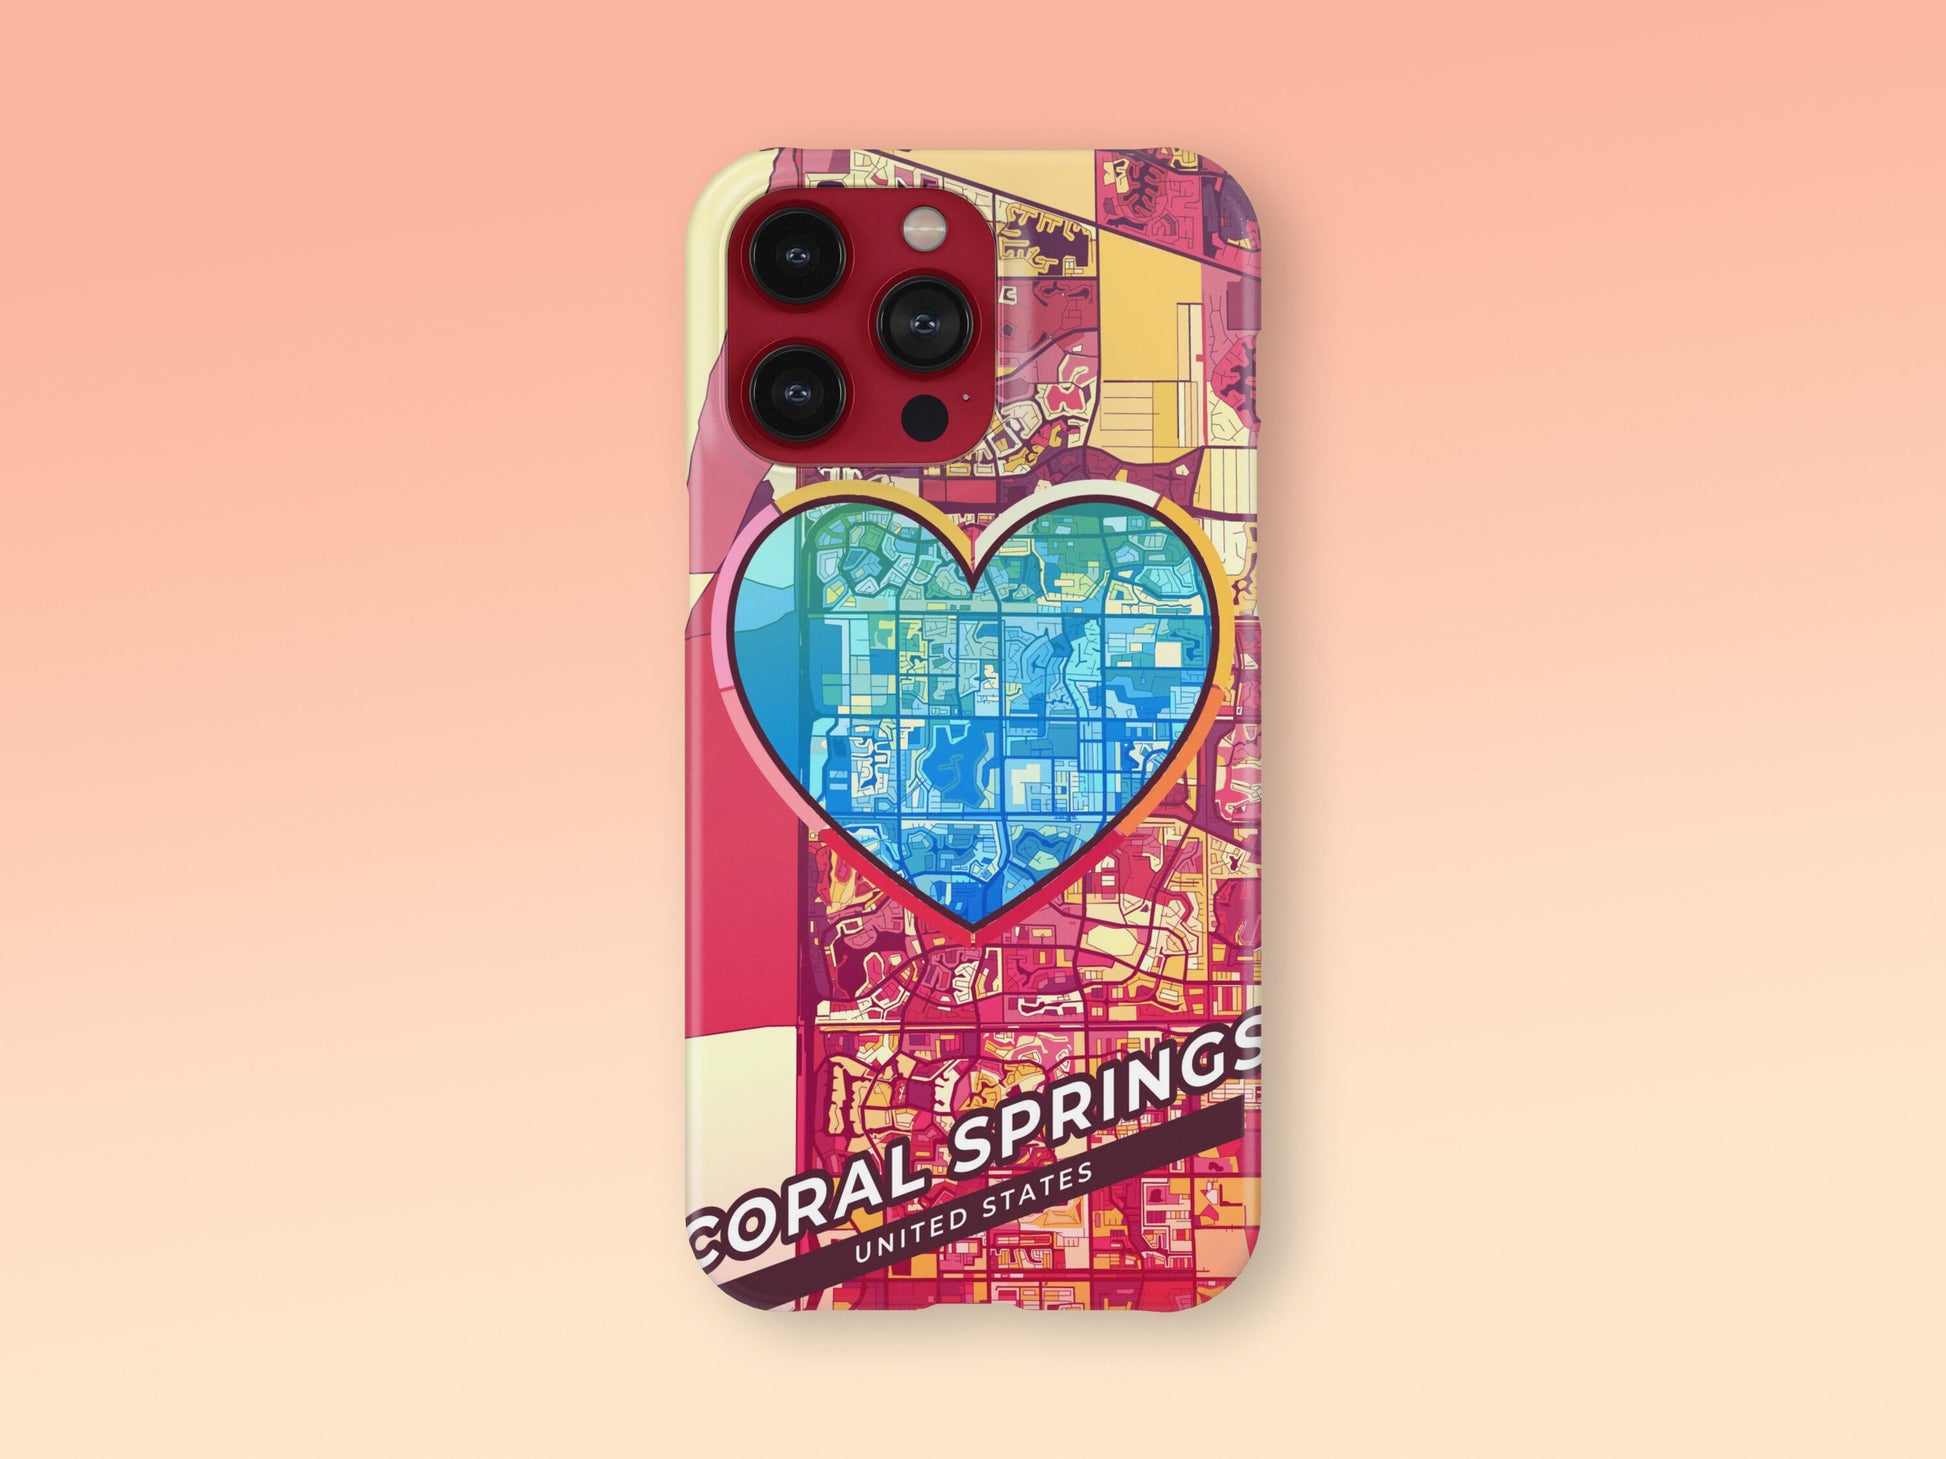 Coral Springs Florida slim phone case with colorful icon. Birthday, wedding or housewarming gift. Couple match cases. 2